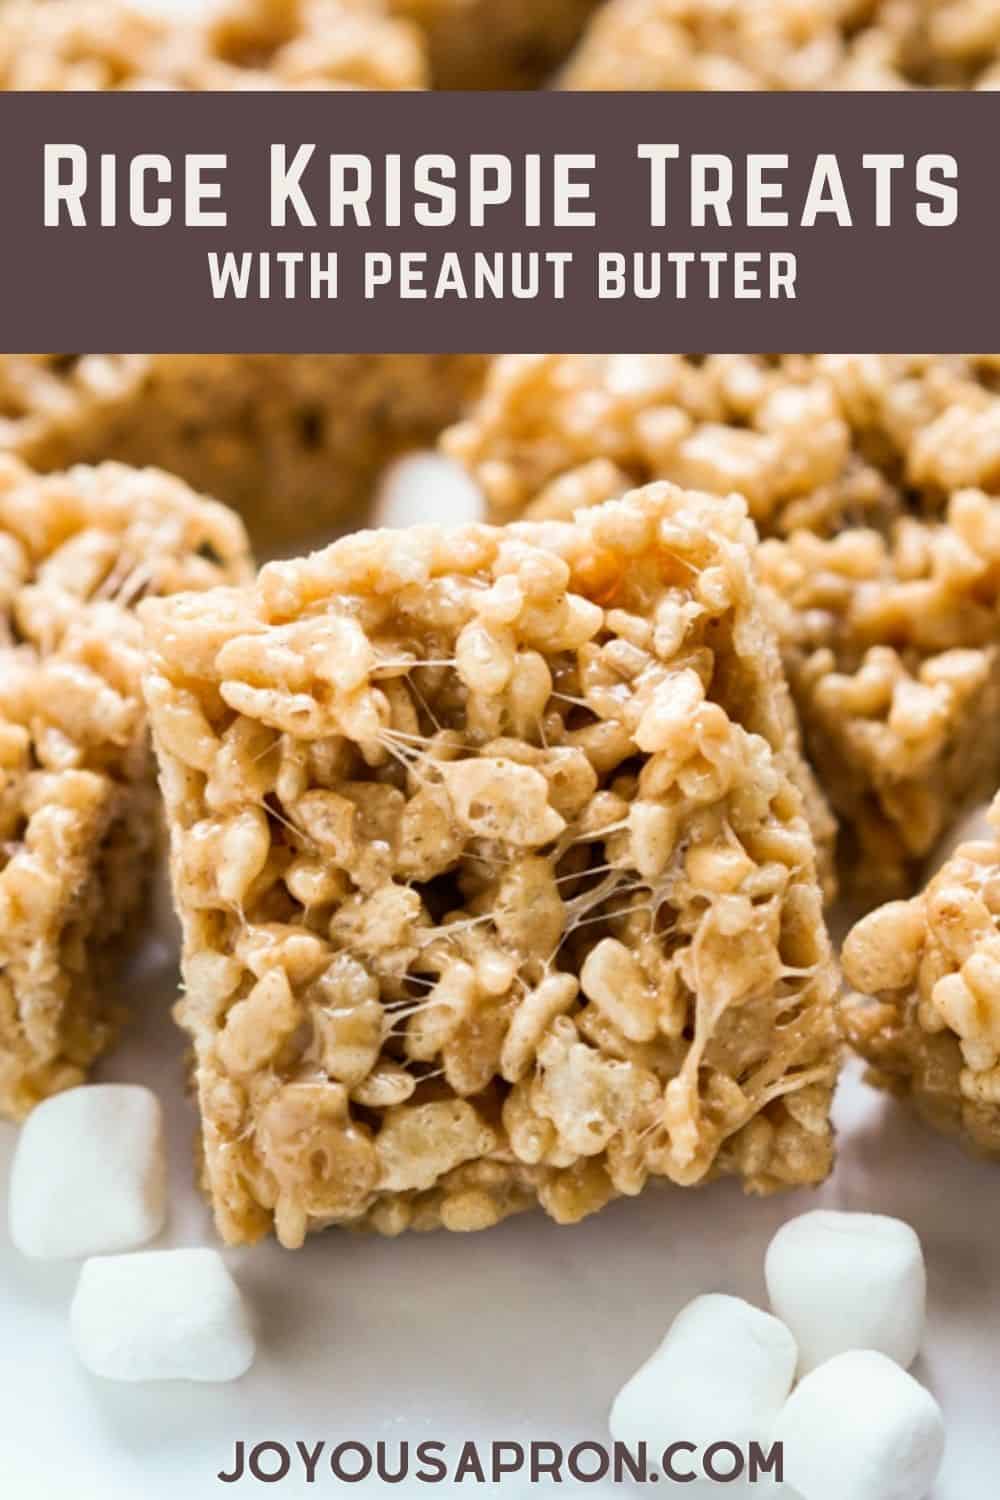 Peanut Butter Rice Krispie Treats - easy cereal treat, great as kid's snacks or dessert! Gooey rice Krispie treats is made with marshmallow and peanut butter. A classic yummy sweet treat! via @joyousapron